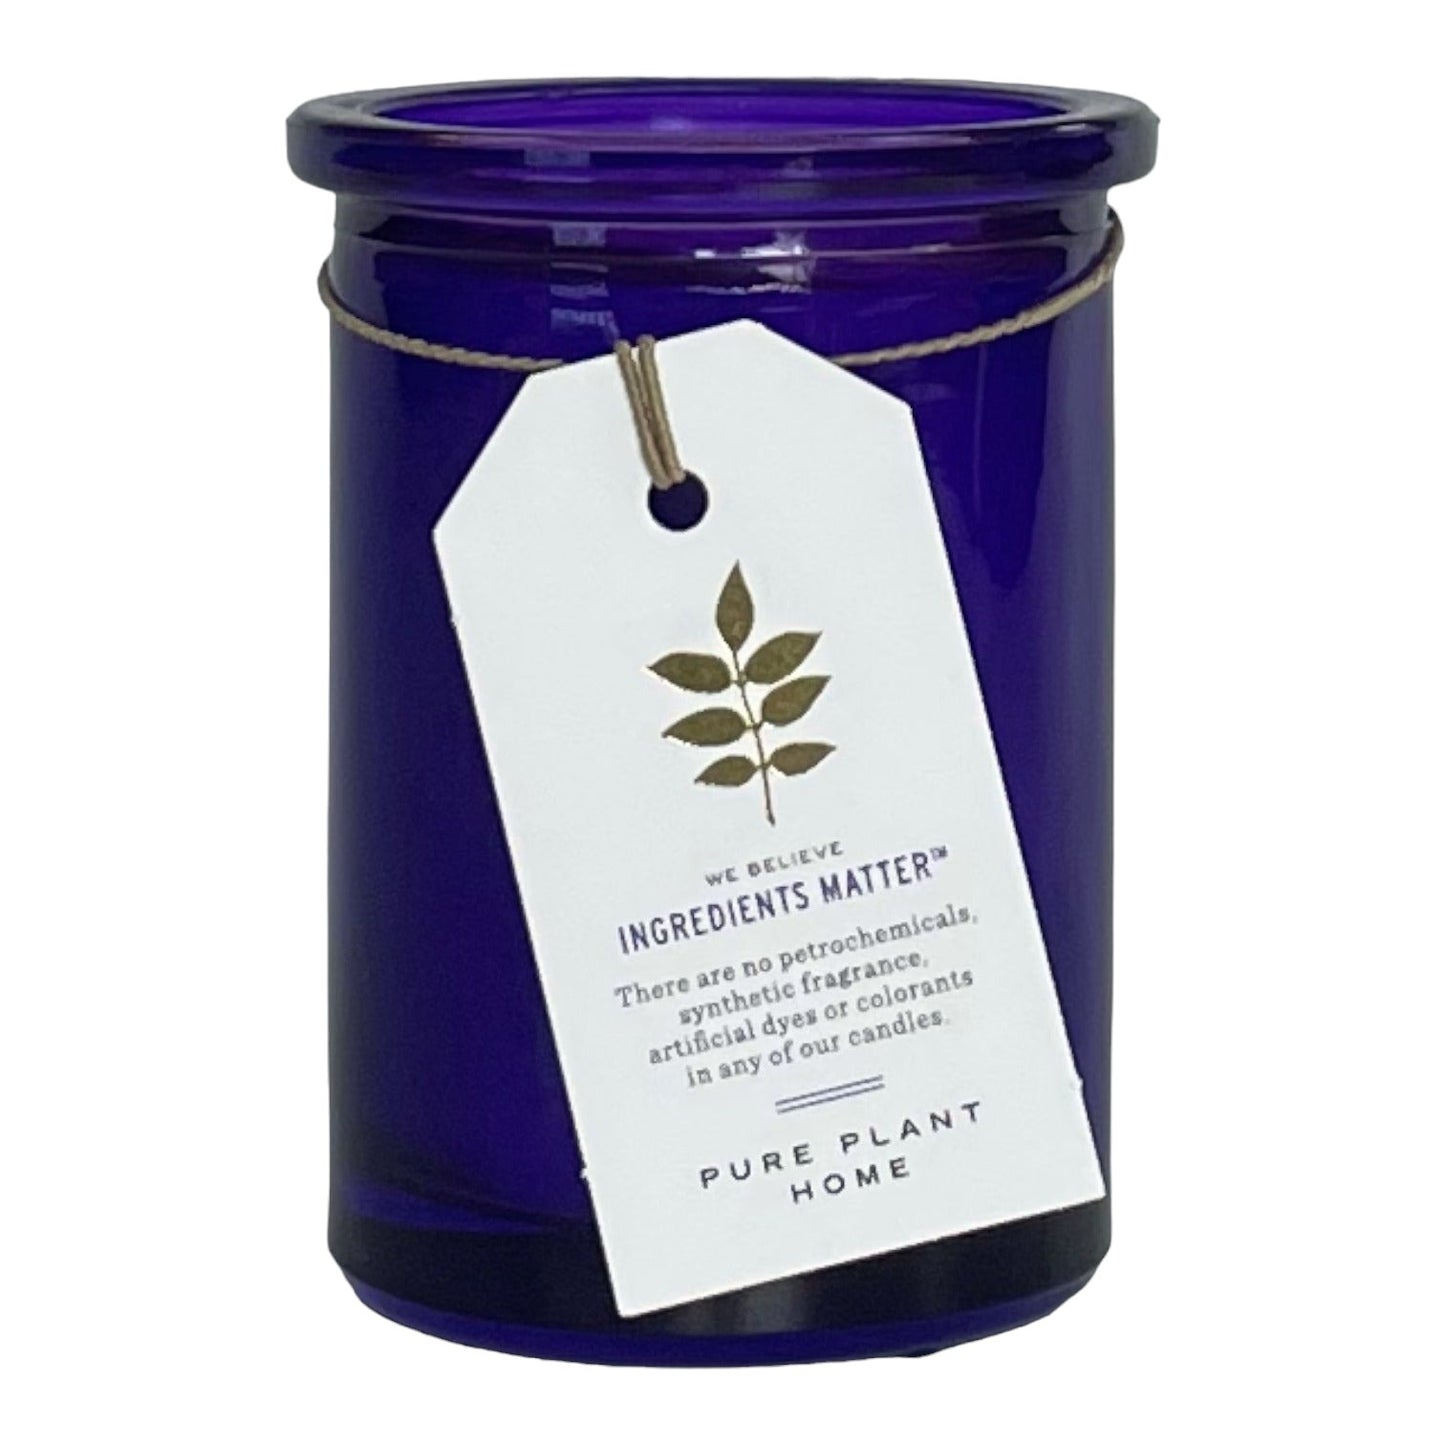 Wildcrafted French Lavender Candle in a purple vessel